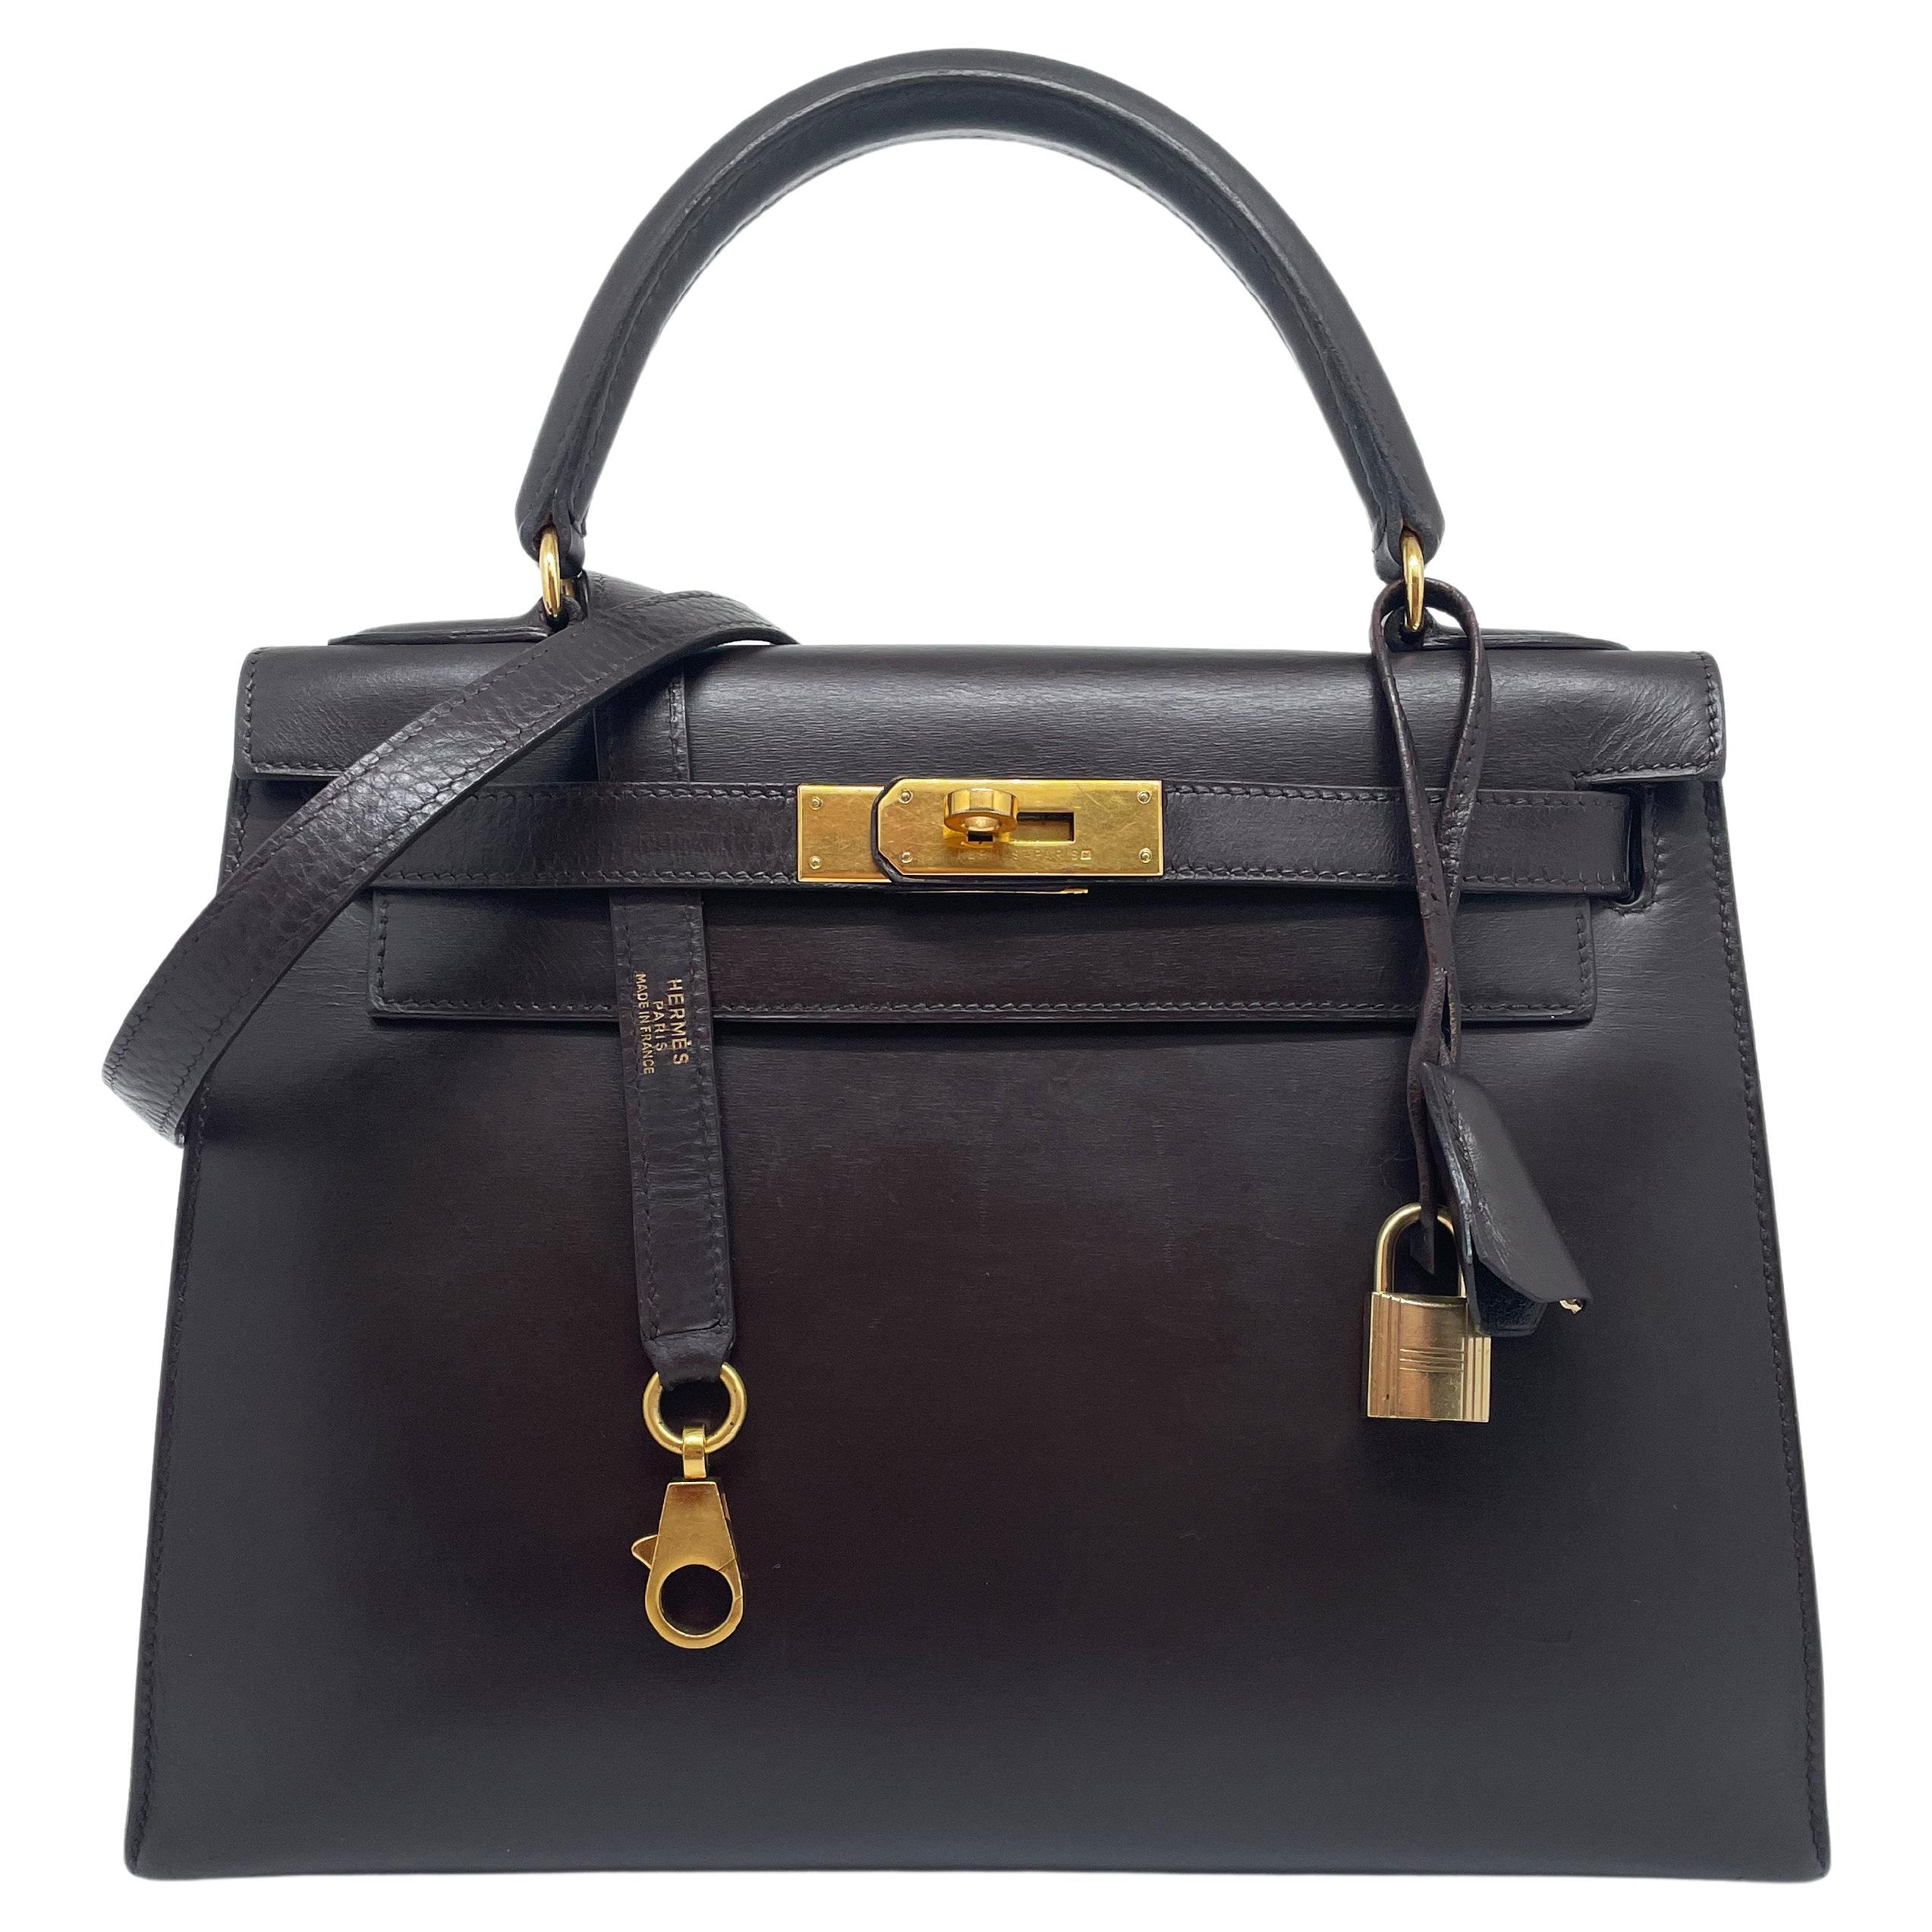 Herm�ès Kelly 28 sellier chocolate bag in box leather